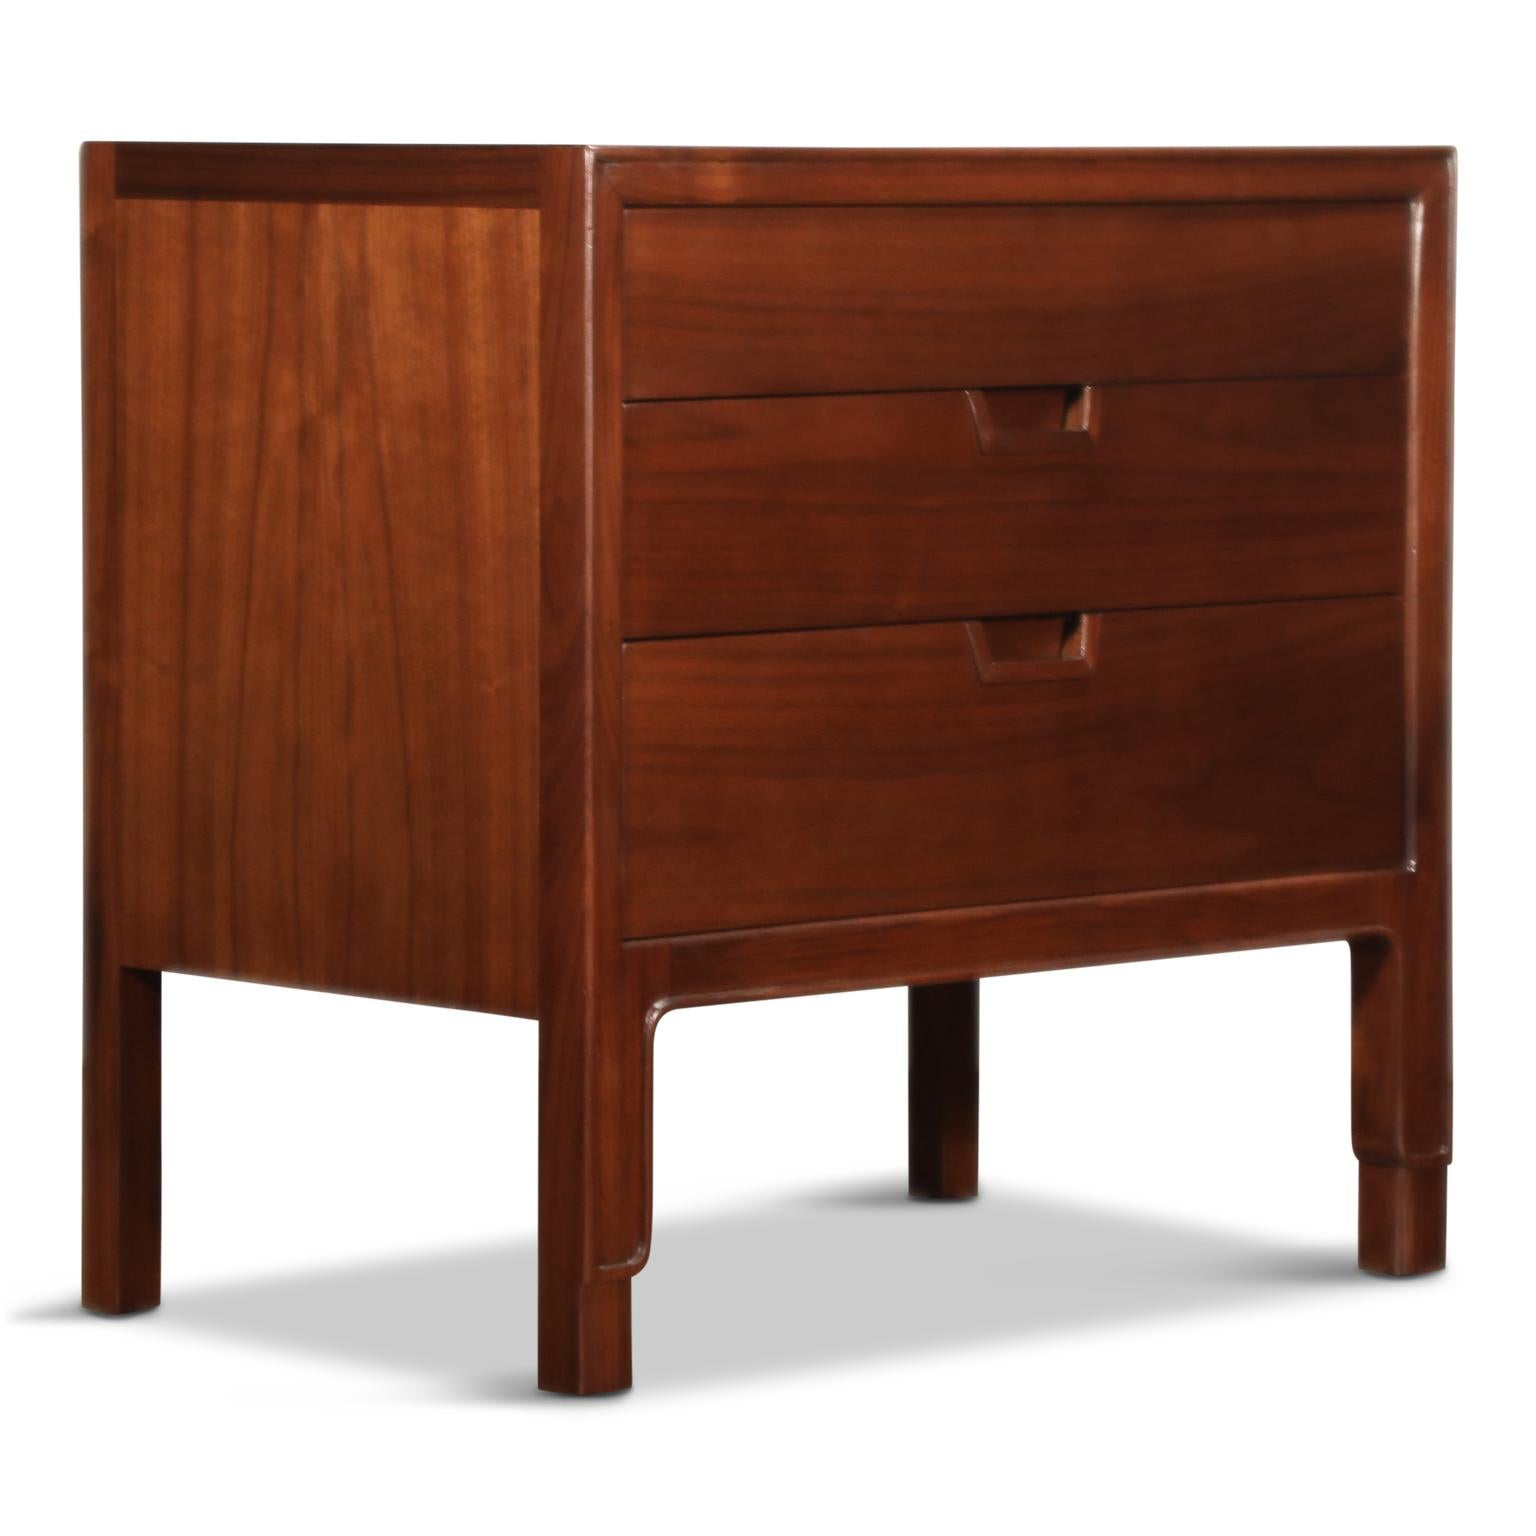 Mid-Century Modern Pair of Refinished Nightstands or End Tables by John Stuart for Janus Collection